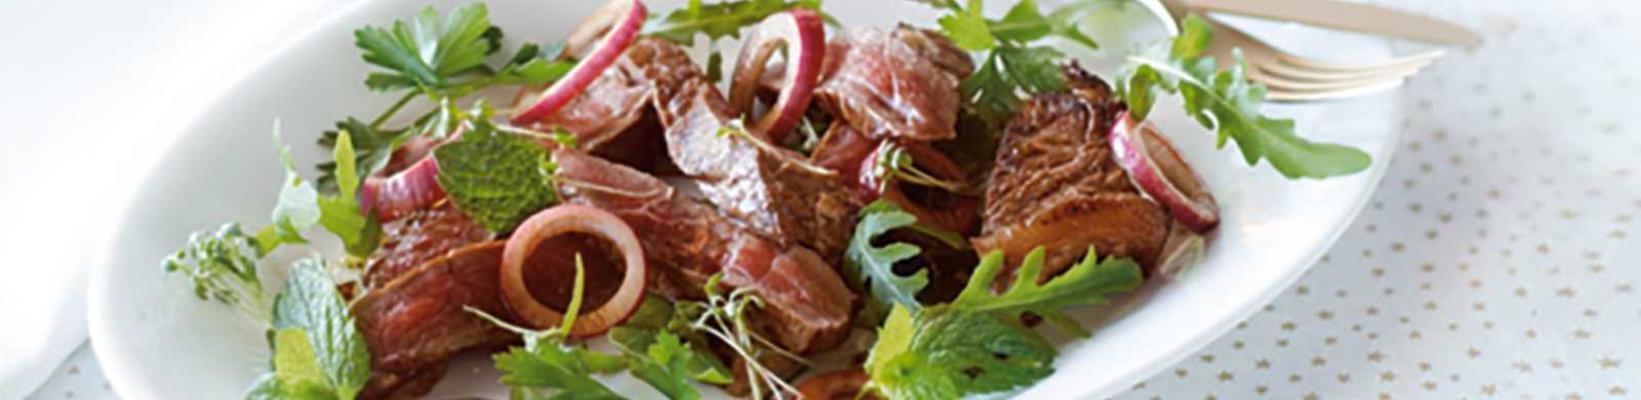 roasted sirloin steak with herb salad